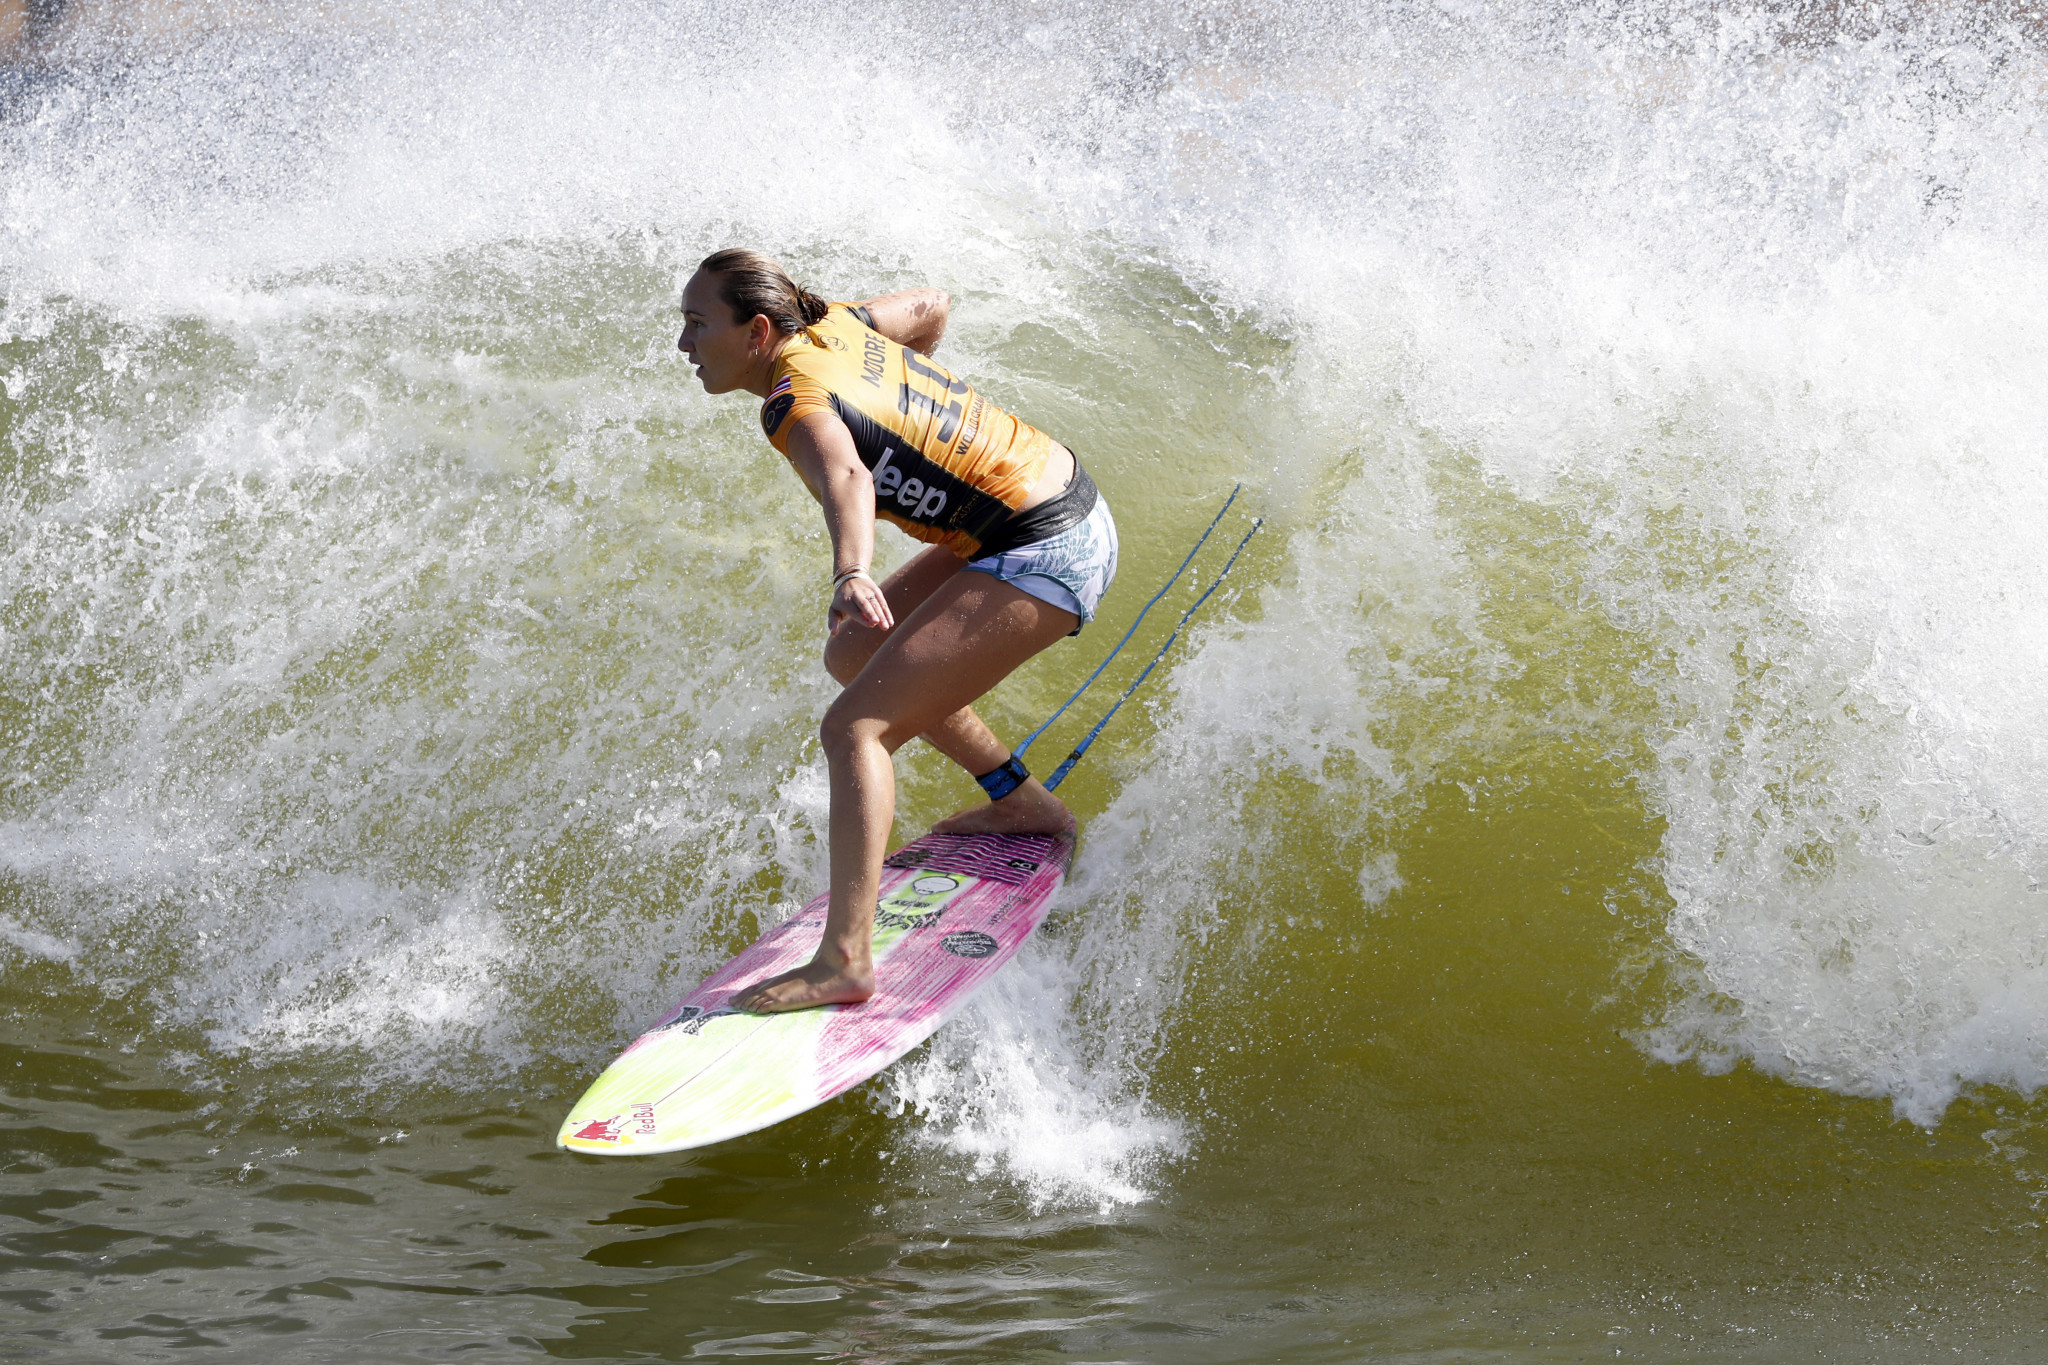 Four-time world champion Moore named on American surf team for Tokyo 2020